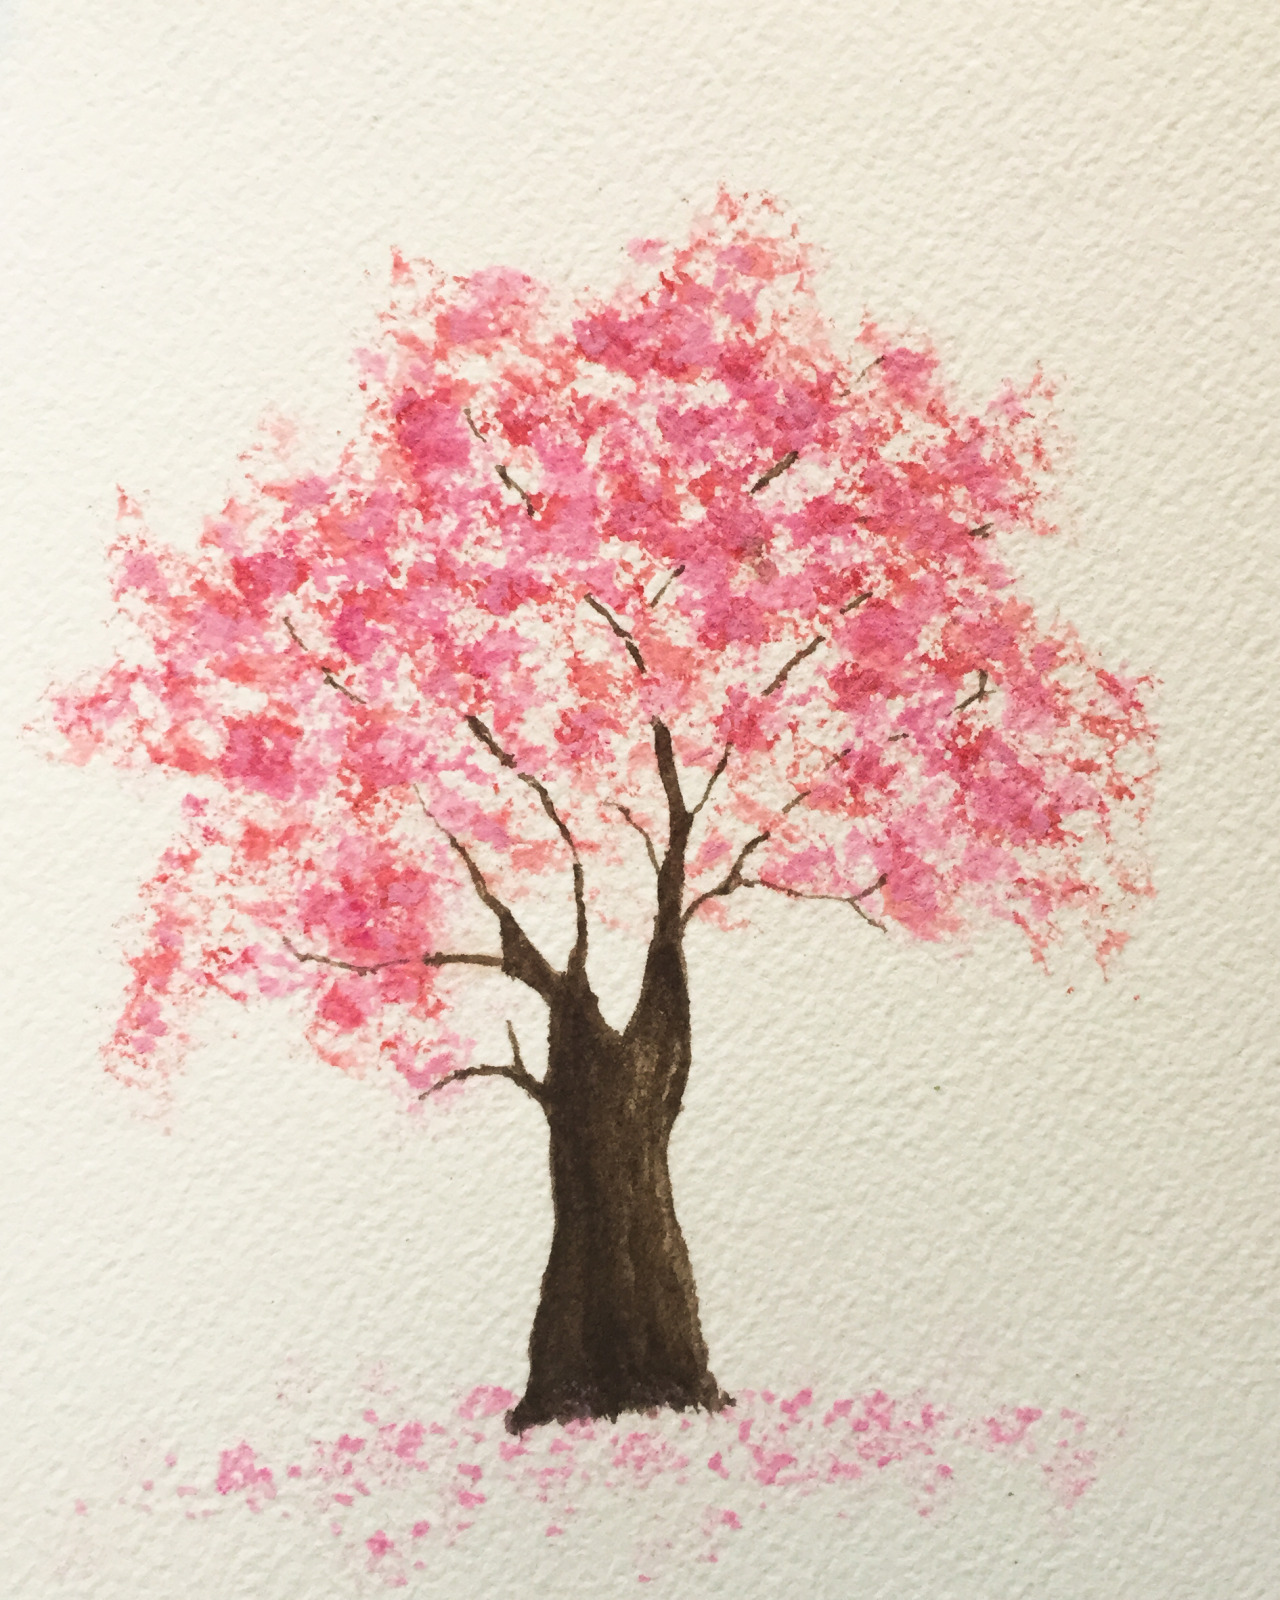 Treleaven 11 - My Art, Photos and Words — One more cherry blossom tree ...